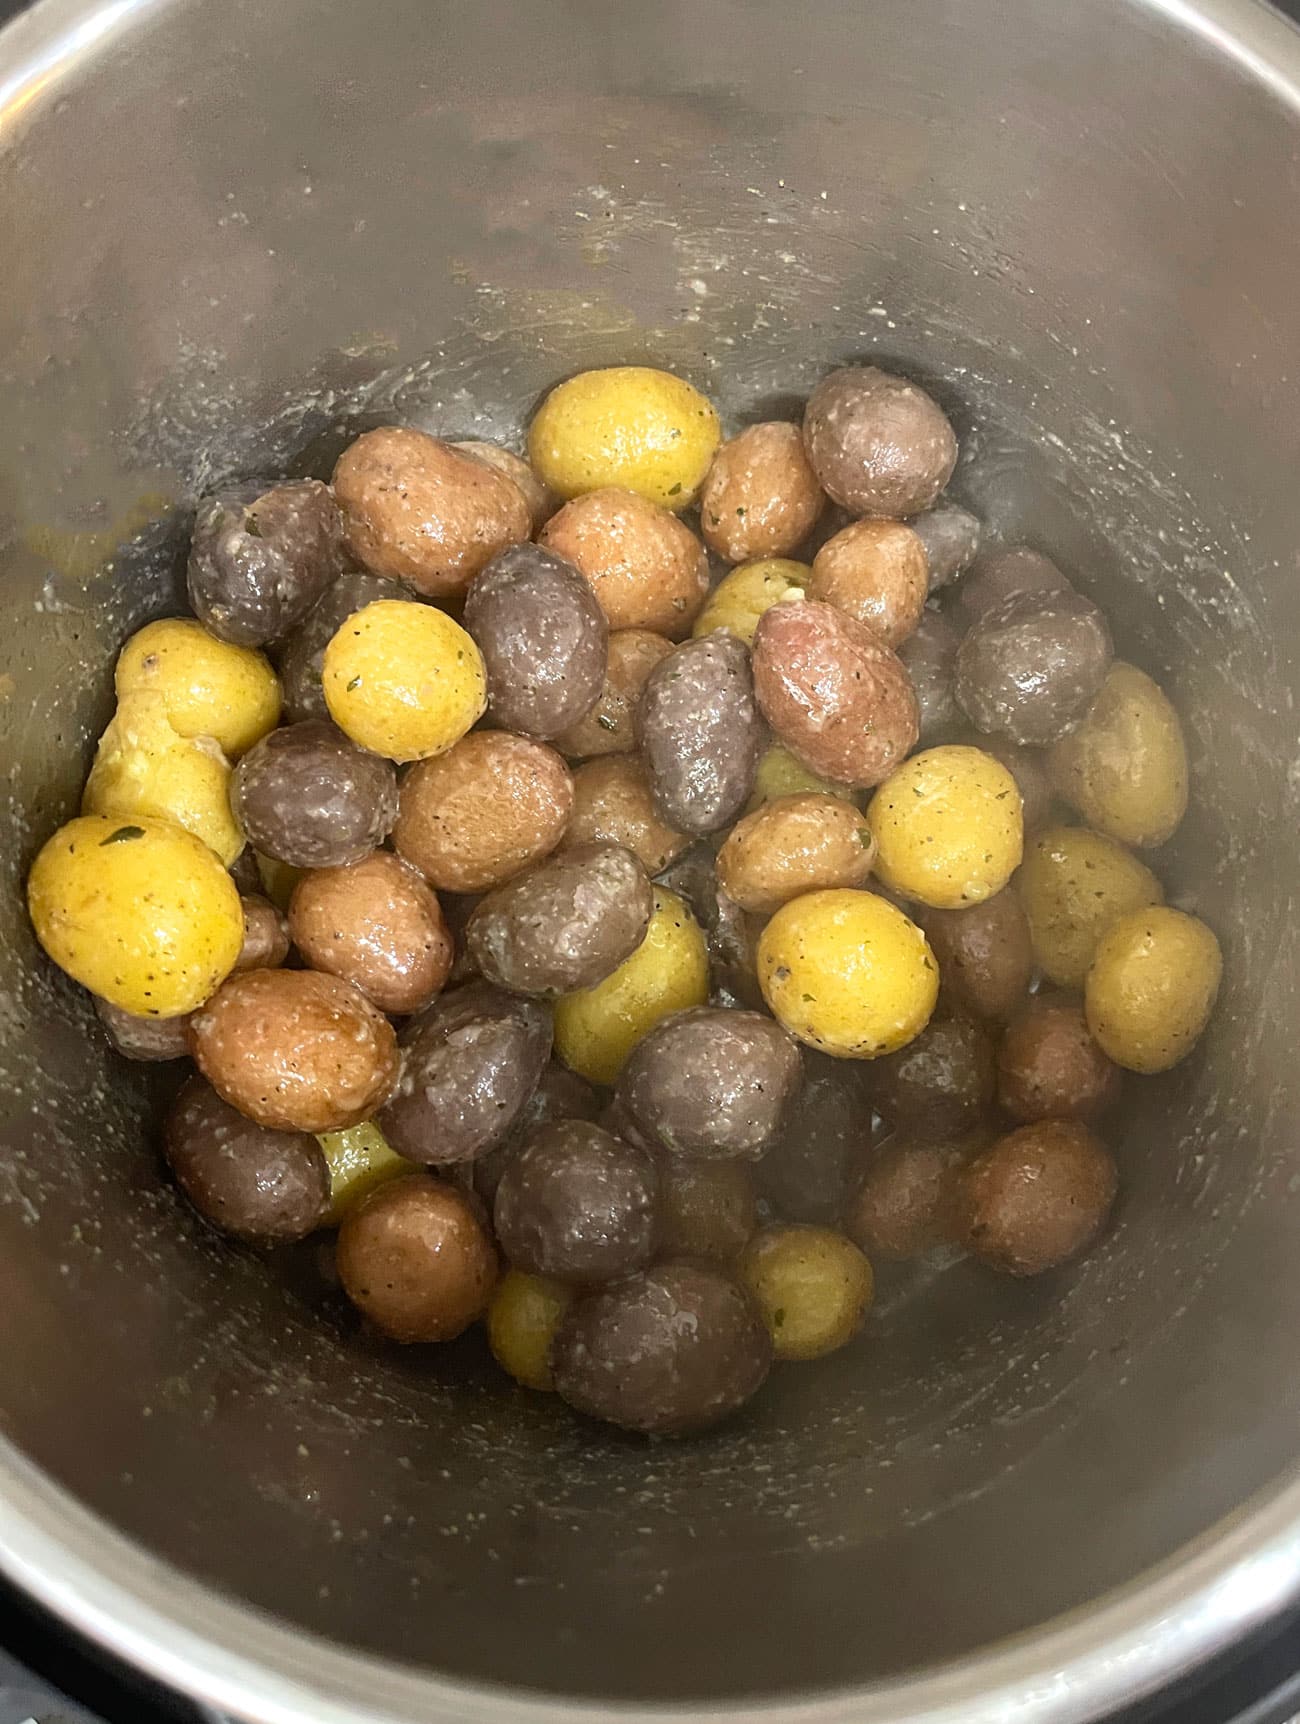 peewee potatoes boiled in instant pot